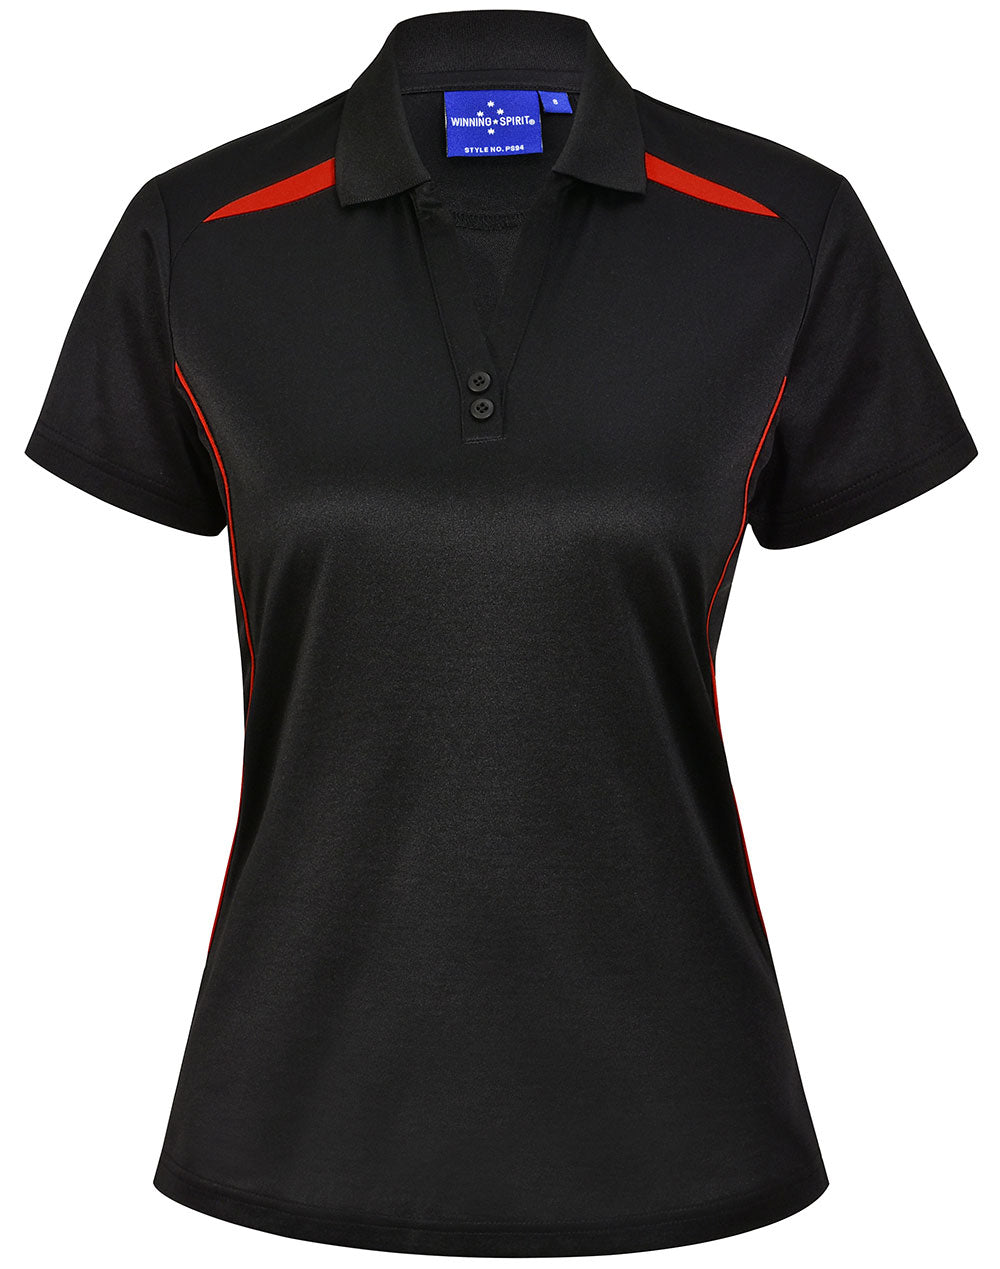 Winning Spirit Women's Sustainable Poly-Cotton Contrast Polo PS94 - Simply Scrubs Australia